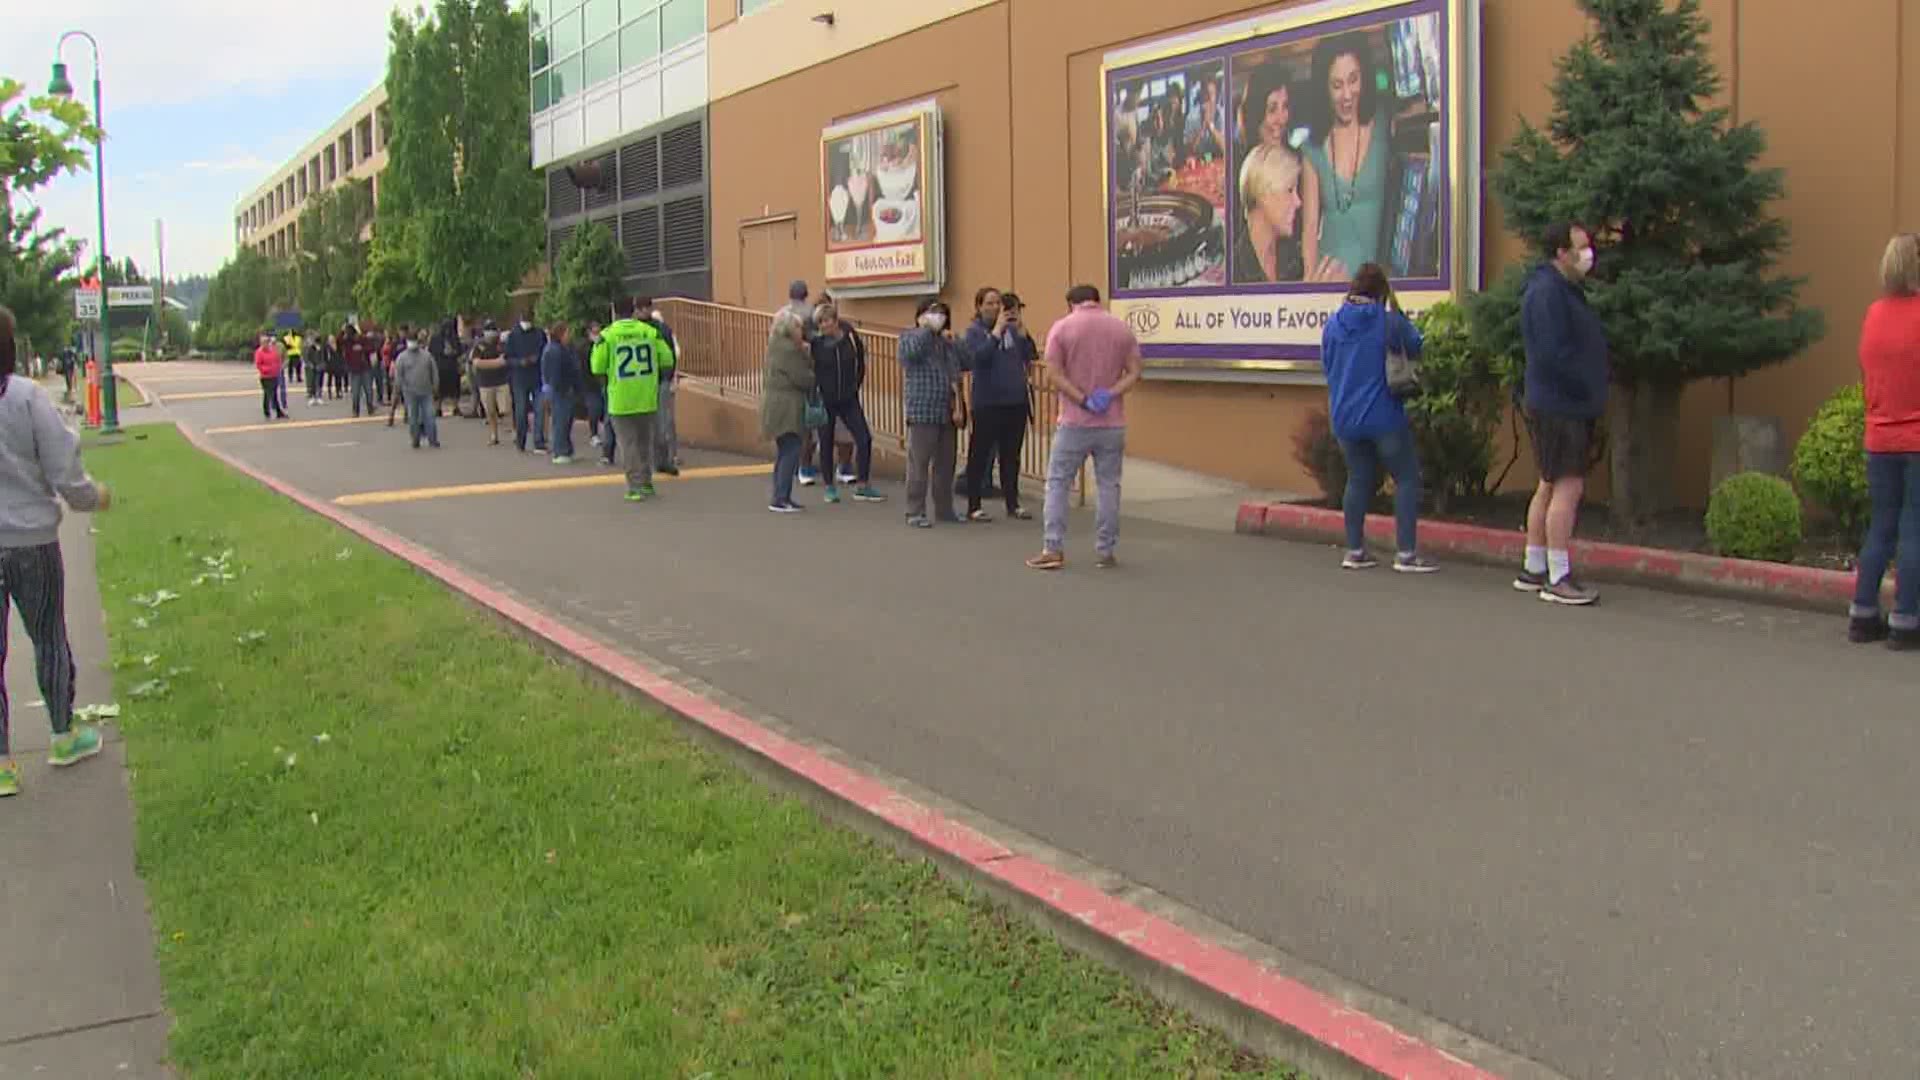 Hundreds waited in line to be screened before entering Emerald Queen Casino. Several area casinos have reopened after closing to slow the area spread of coronavirus